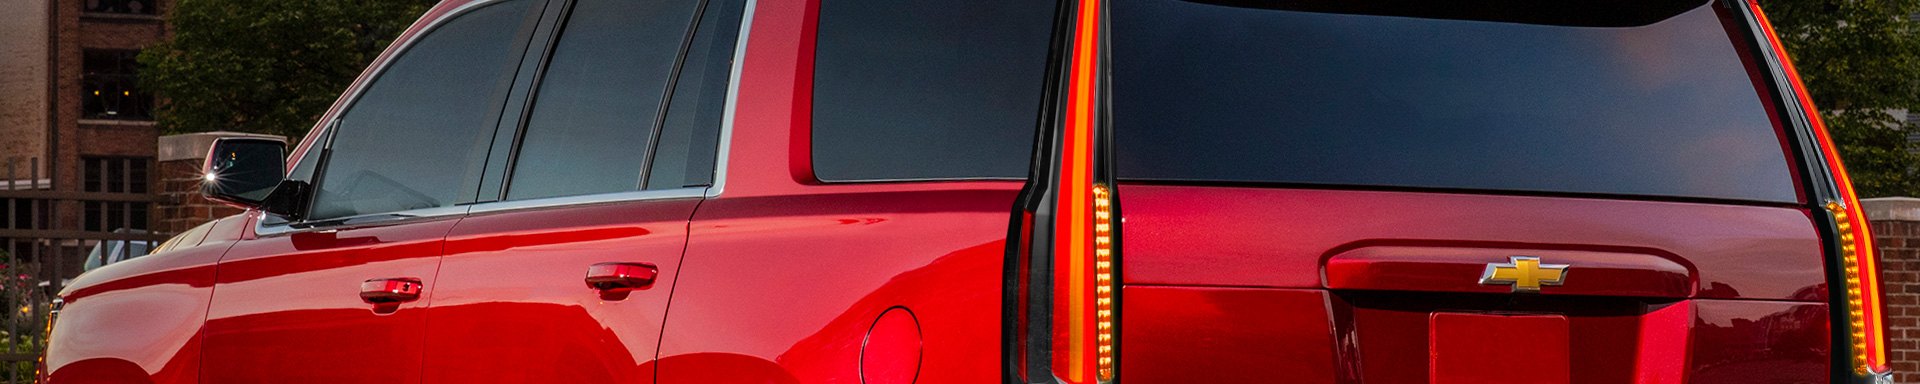 Custom LED Tail Lights are Now Available for Chevy Tahoe and Suburban